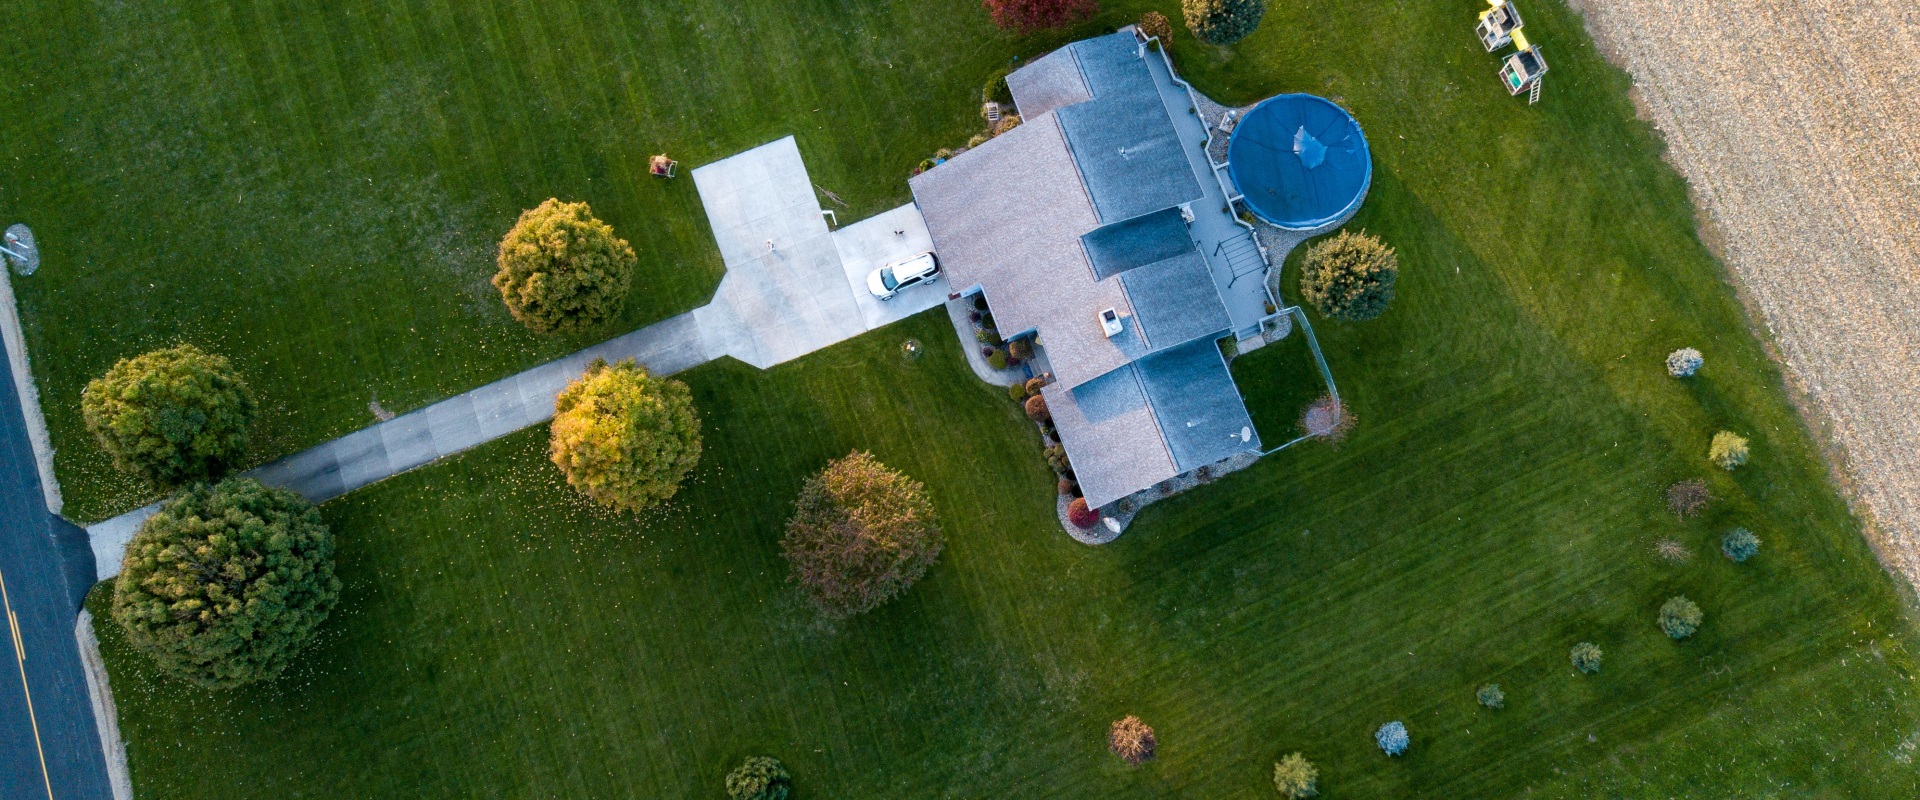 Landscaping Services In Belmont, MA: Why Hiring A Professional Landscaper Is Worth Every Penny